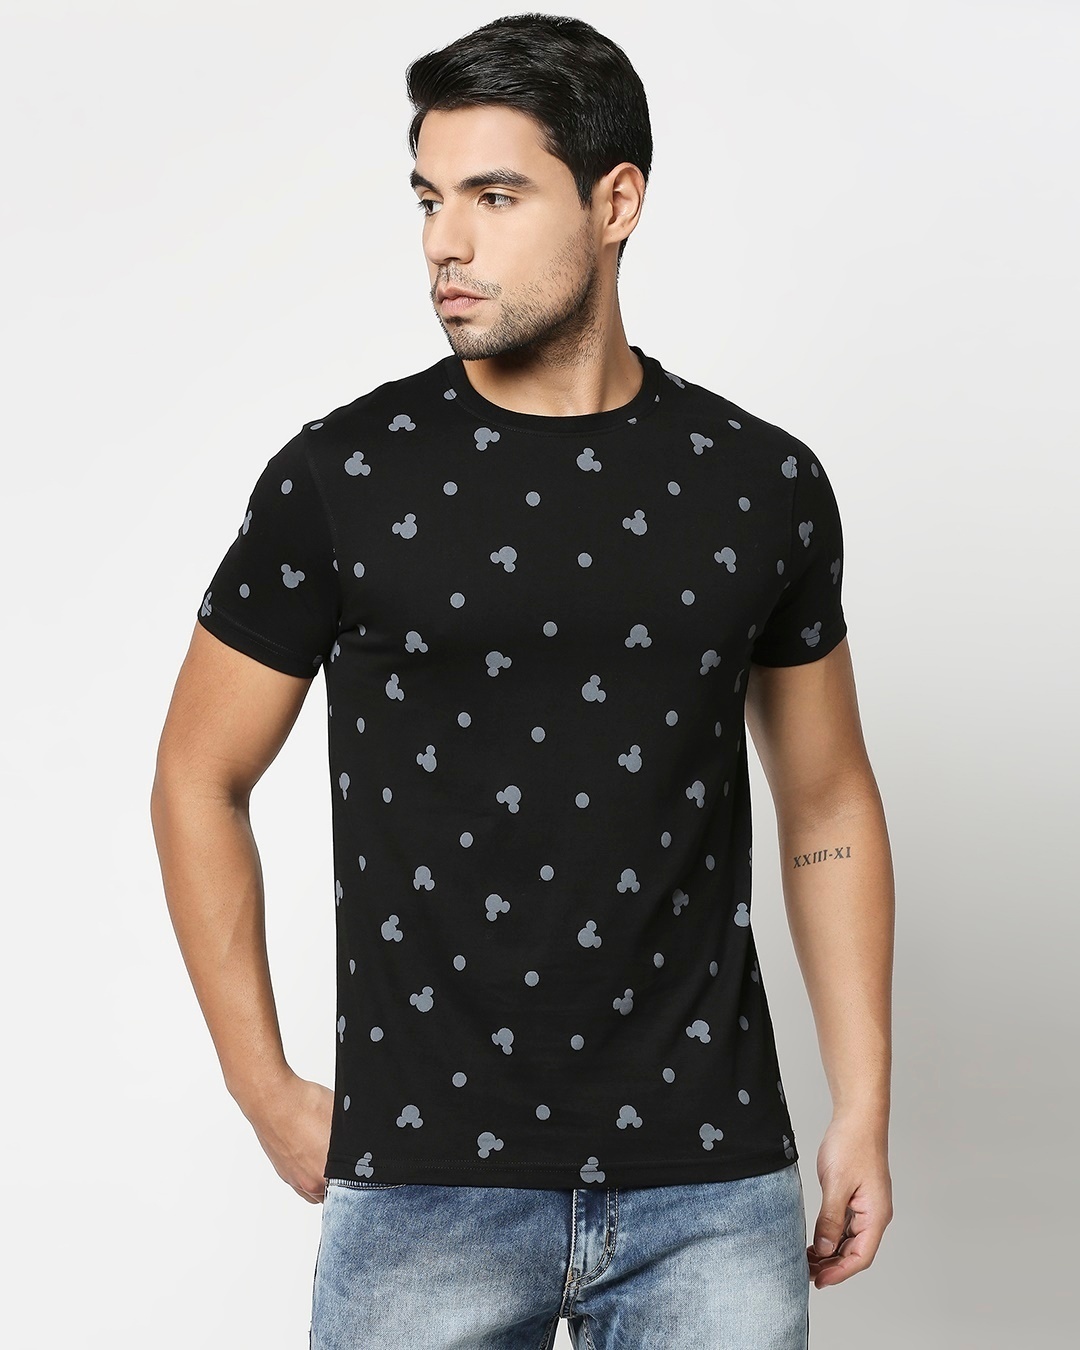 Shop Mickey Silhouette Half Sleeves AOP T-Shirt(DL)-Back